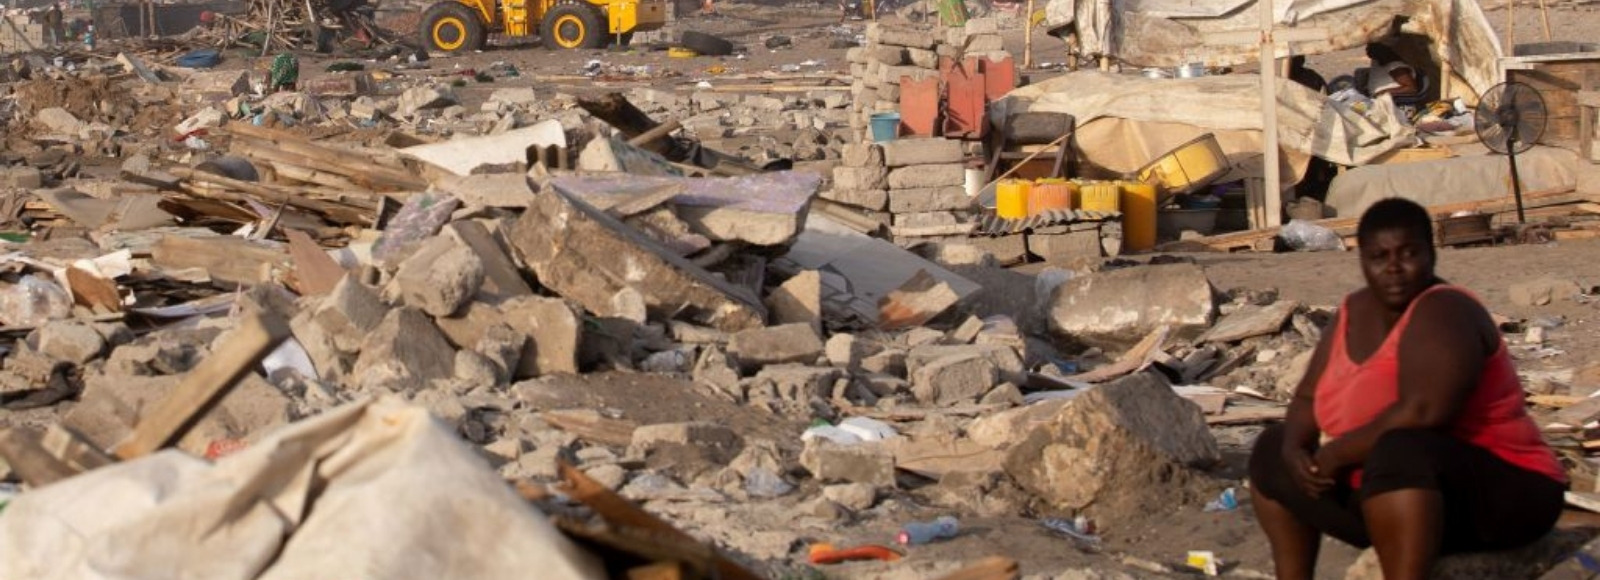 A woman sits at a site in James Town, Accra, demolished in May 2020 to make way for a new fishing port complex